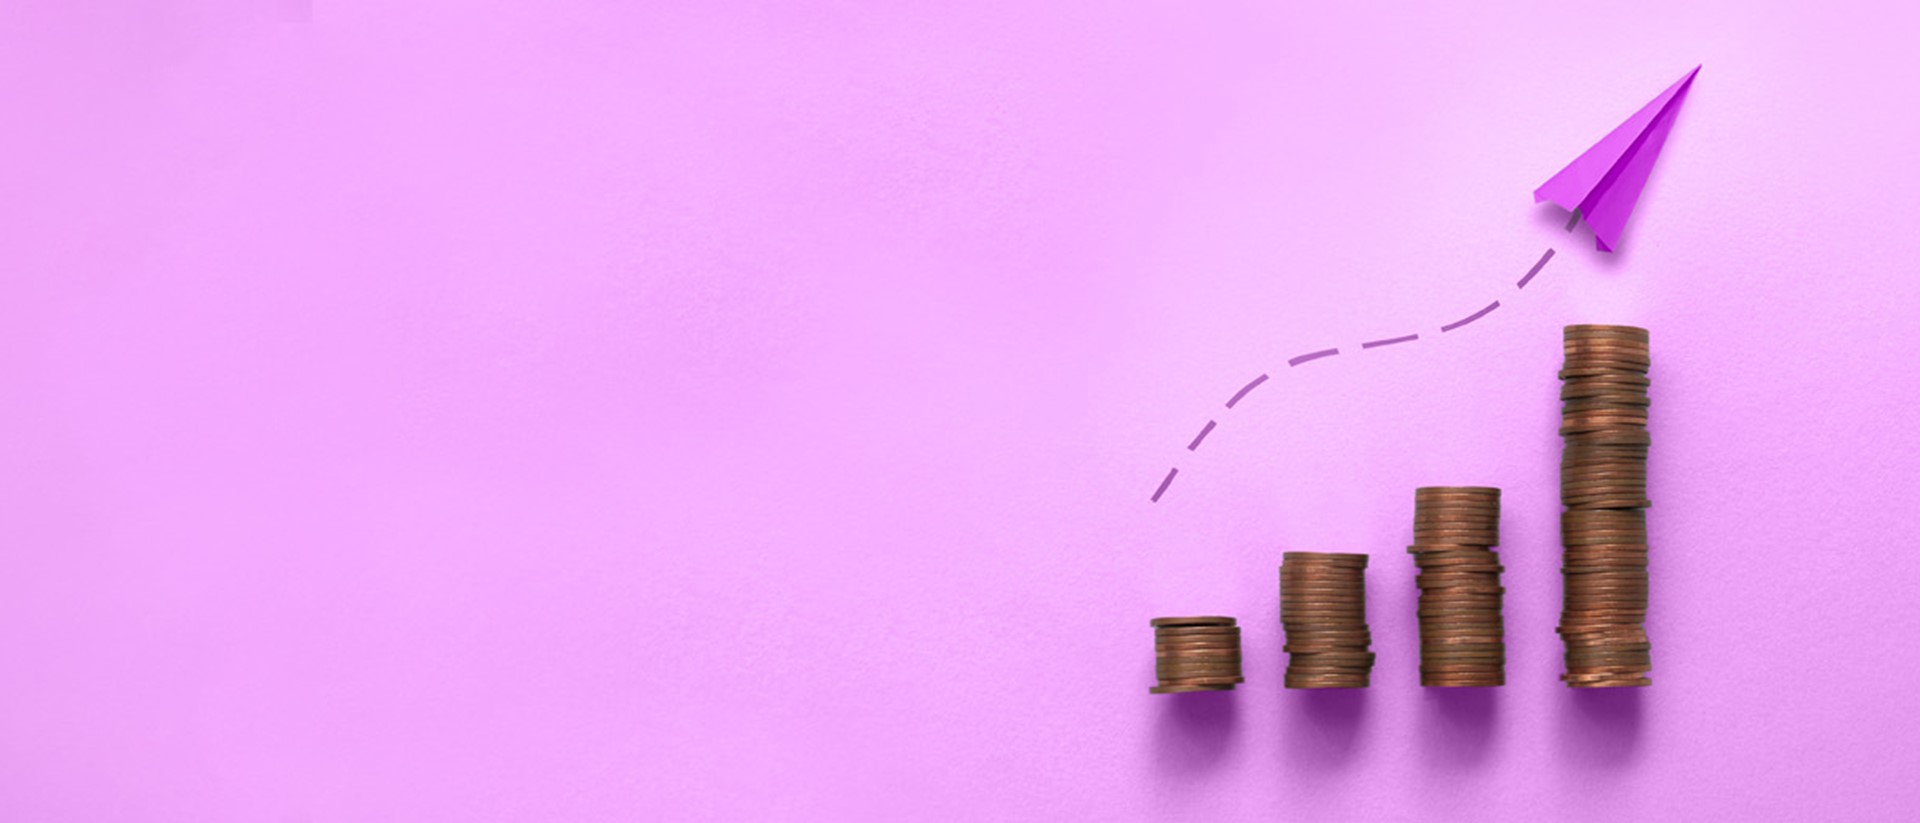 Image of a purple paper airplane flying above a stack of coins against a purple background